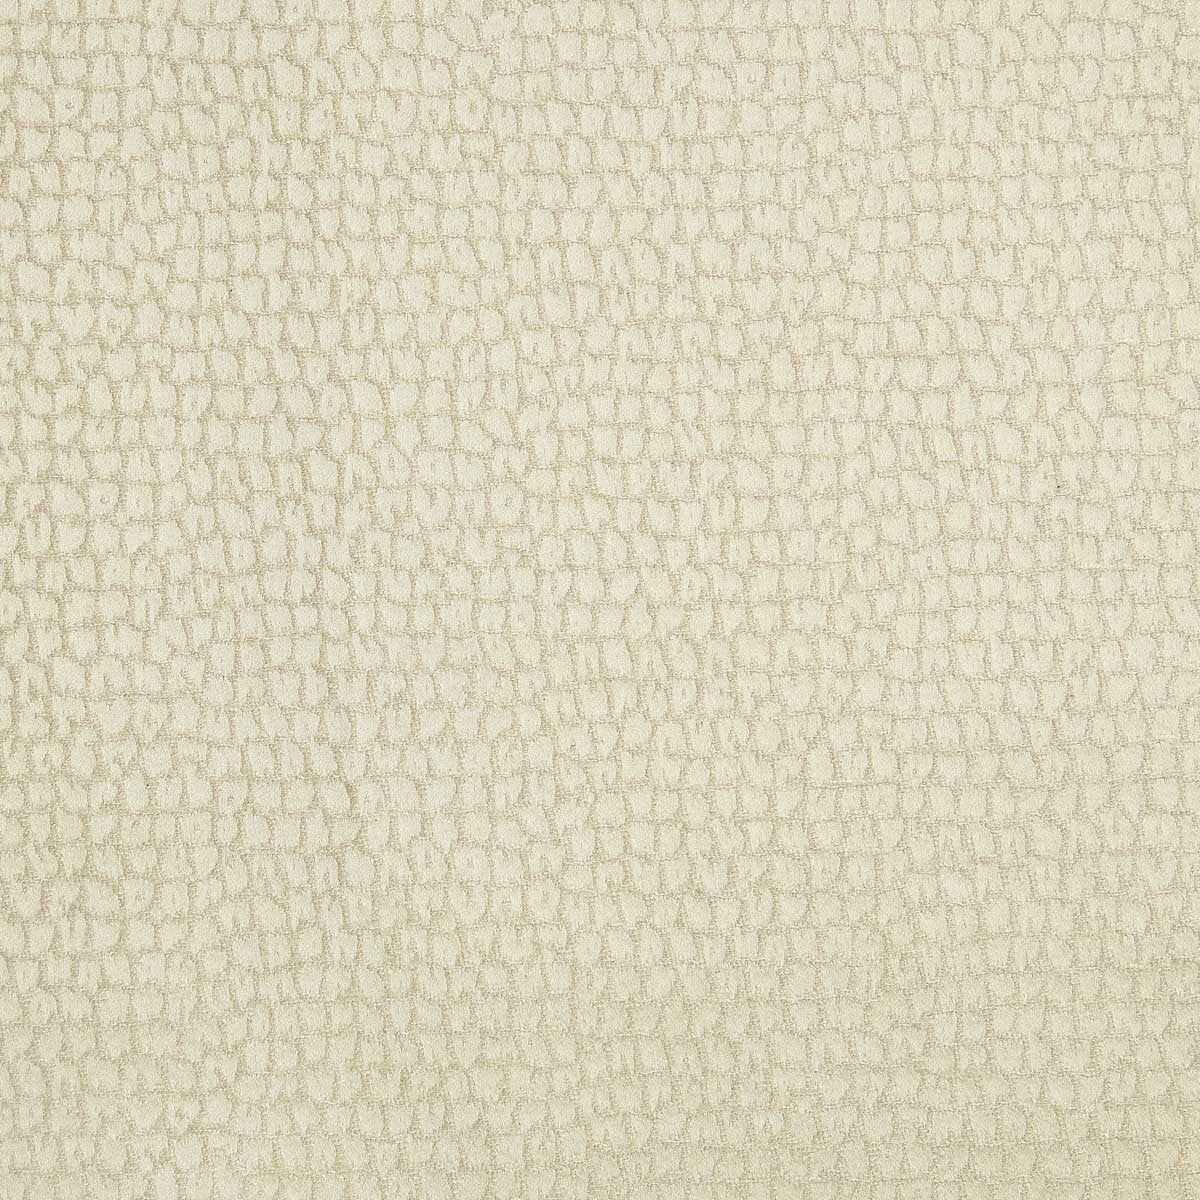 Gaudi fabric in 7 color - pattern LZ-30410.07.0 - by Kravet Couture in the Lizzo collection